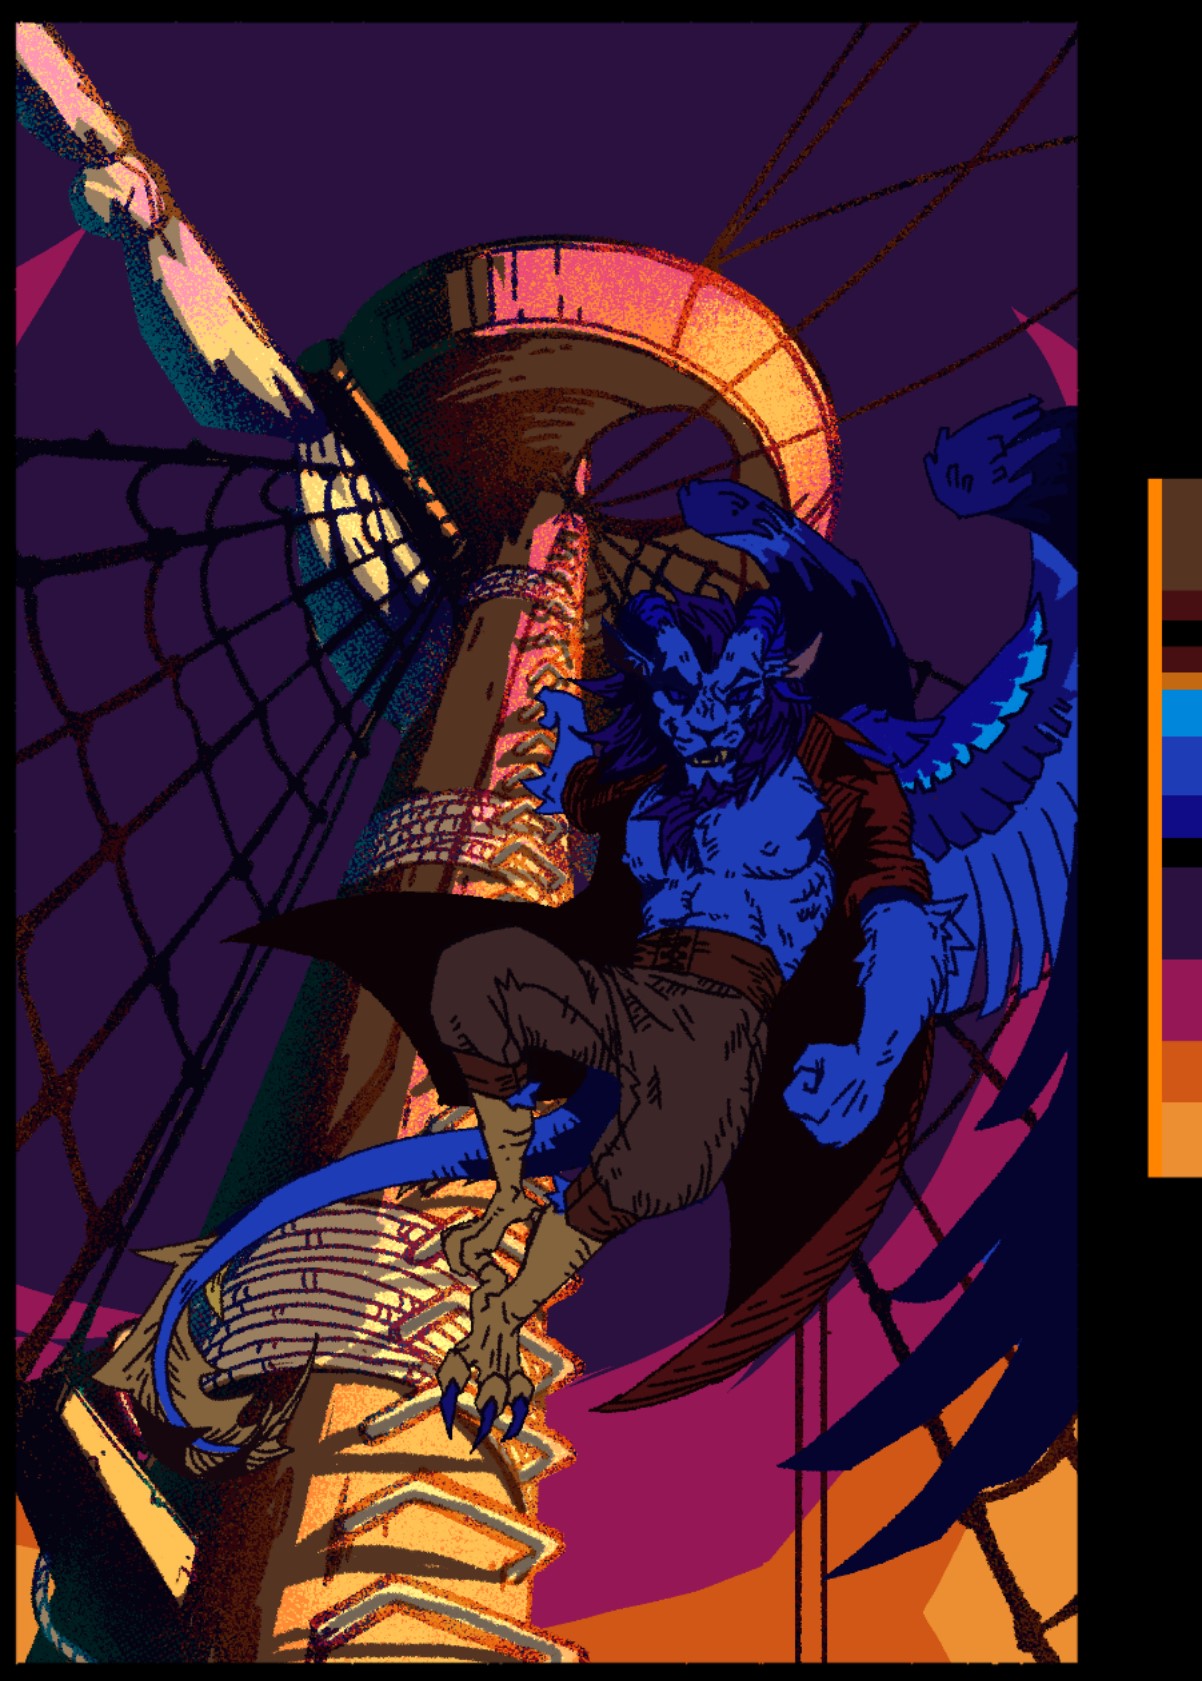 A work-in-progress drawing of the illustration at the top of this web page, that of a bipedal chimera character climbing up a pole to a crows nest. Lighting streaks across the sky above as the character gazes down past the viewer with a smarmy expression. An assortment of colors are also arranged nxt to the illustration.